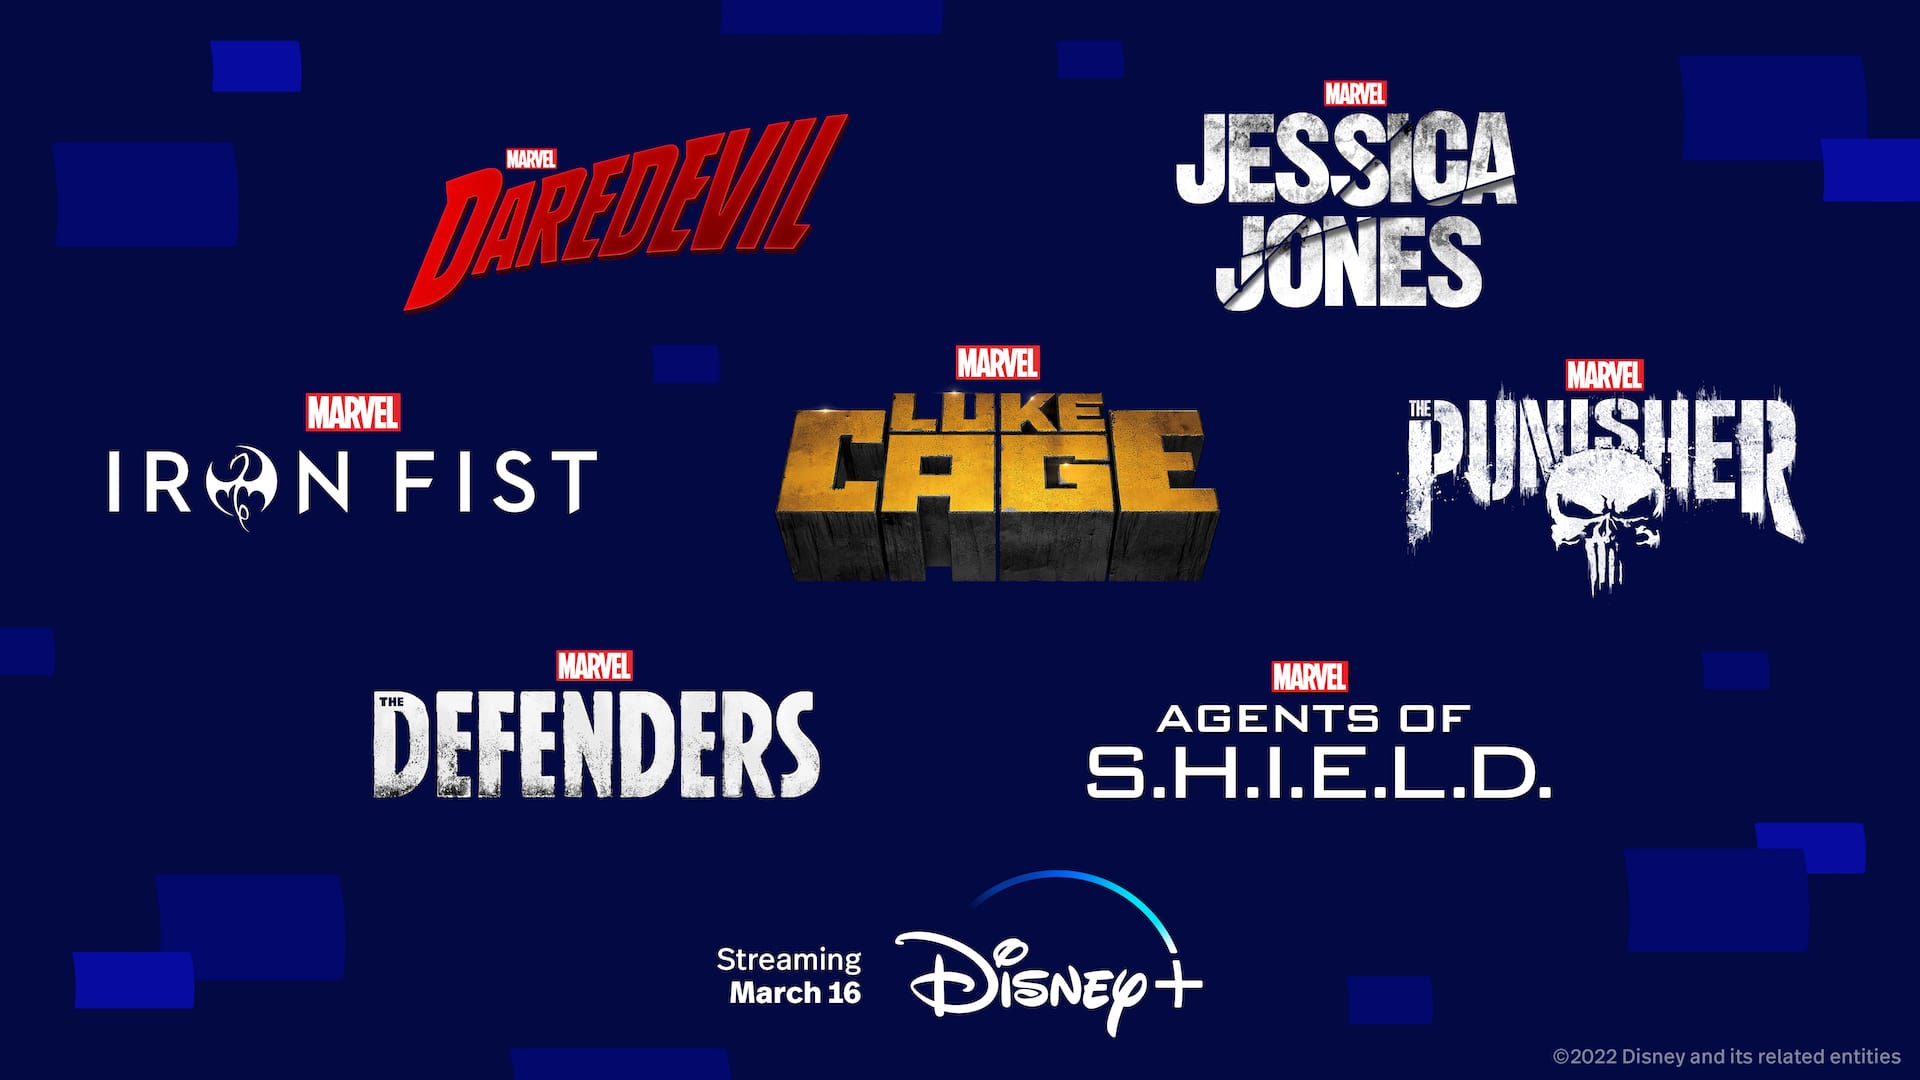 Marvel Netflix series and parental controls coming to Disney+ March 16